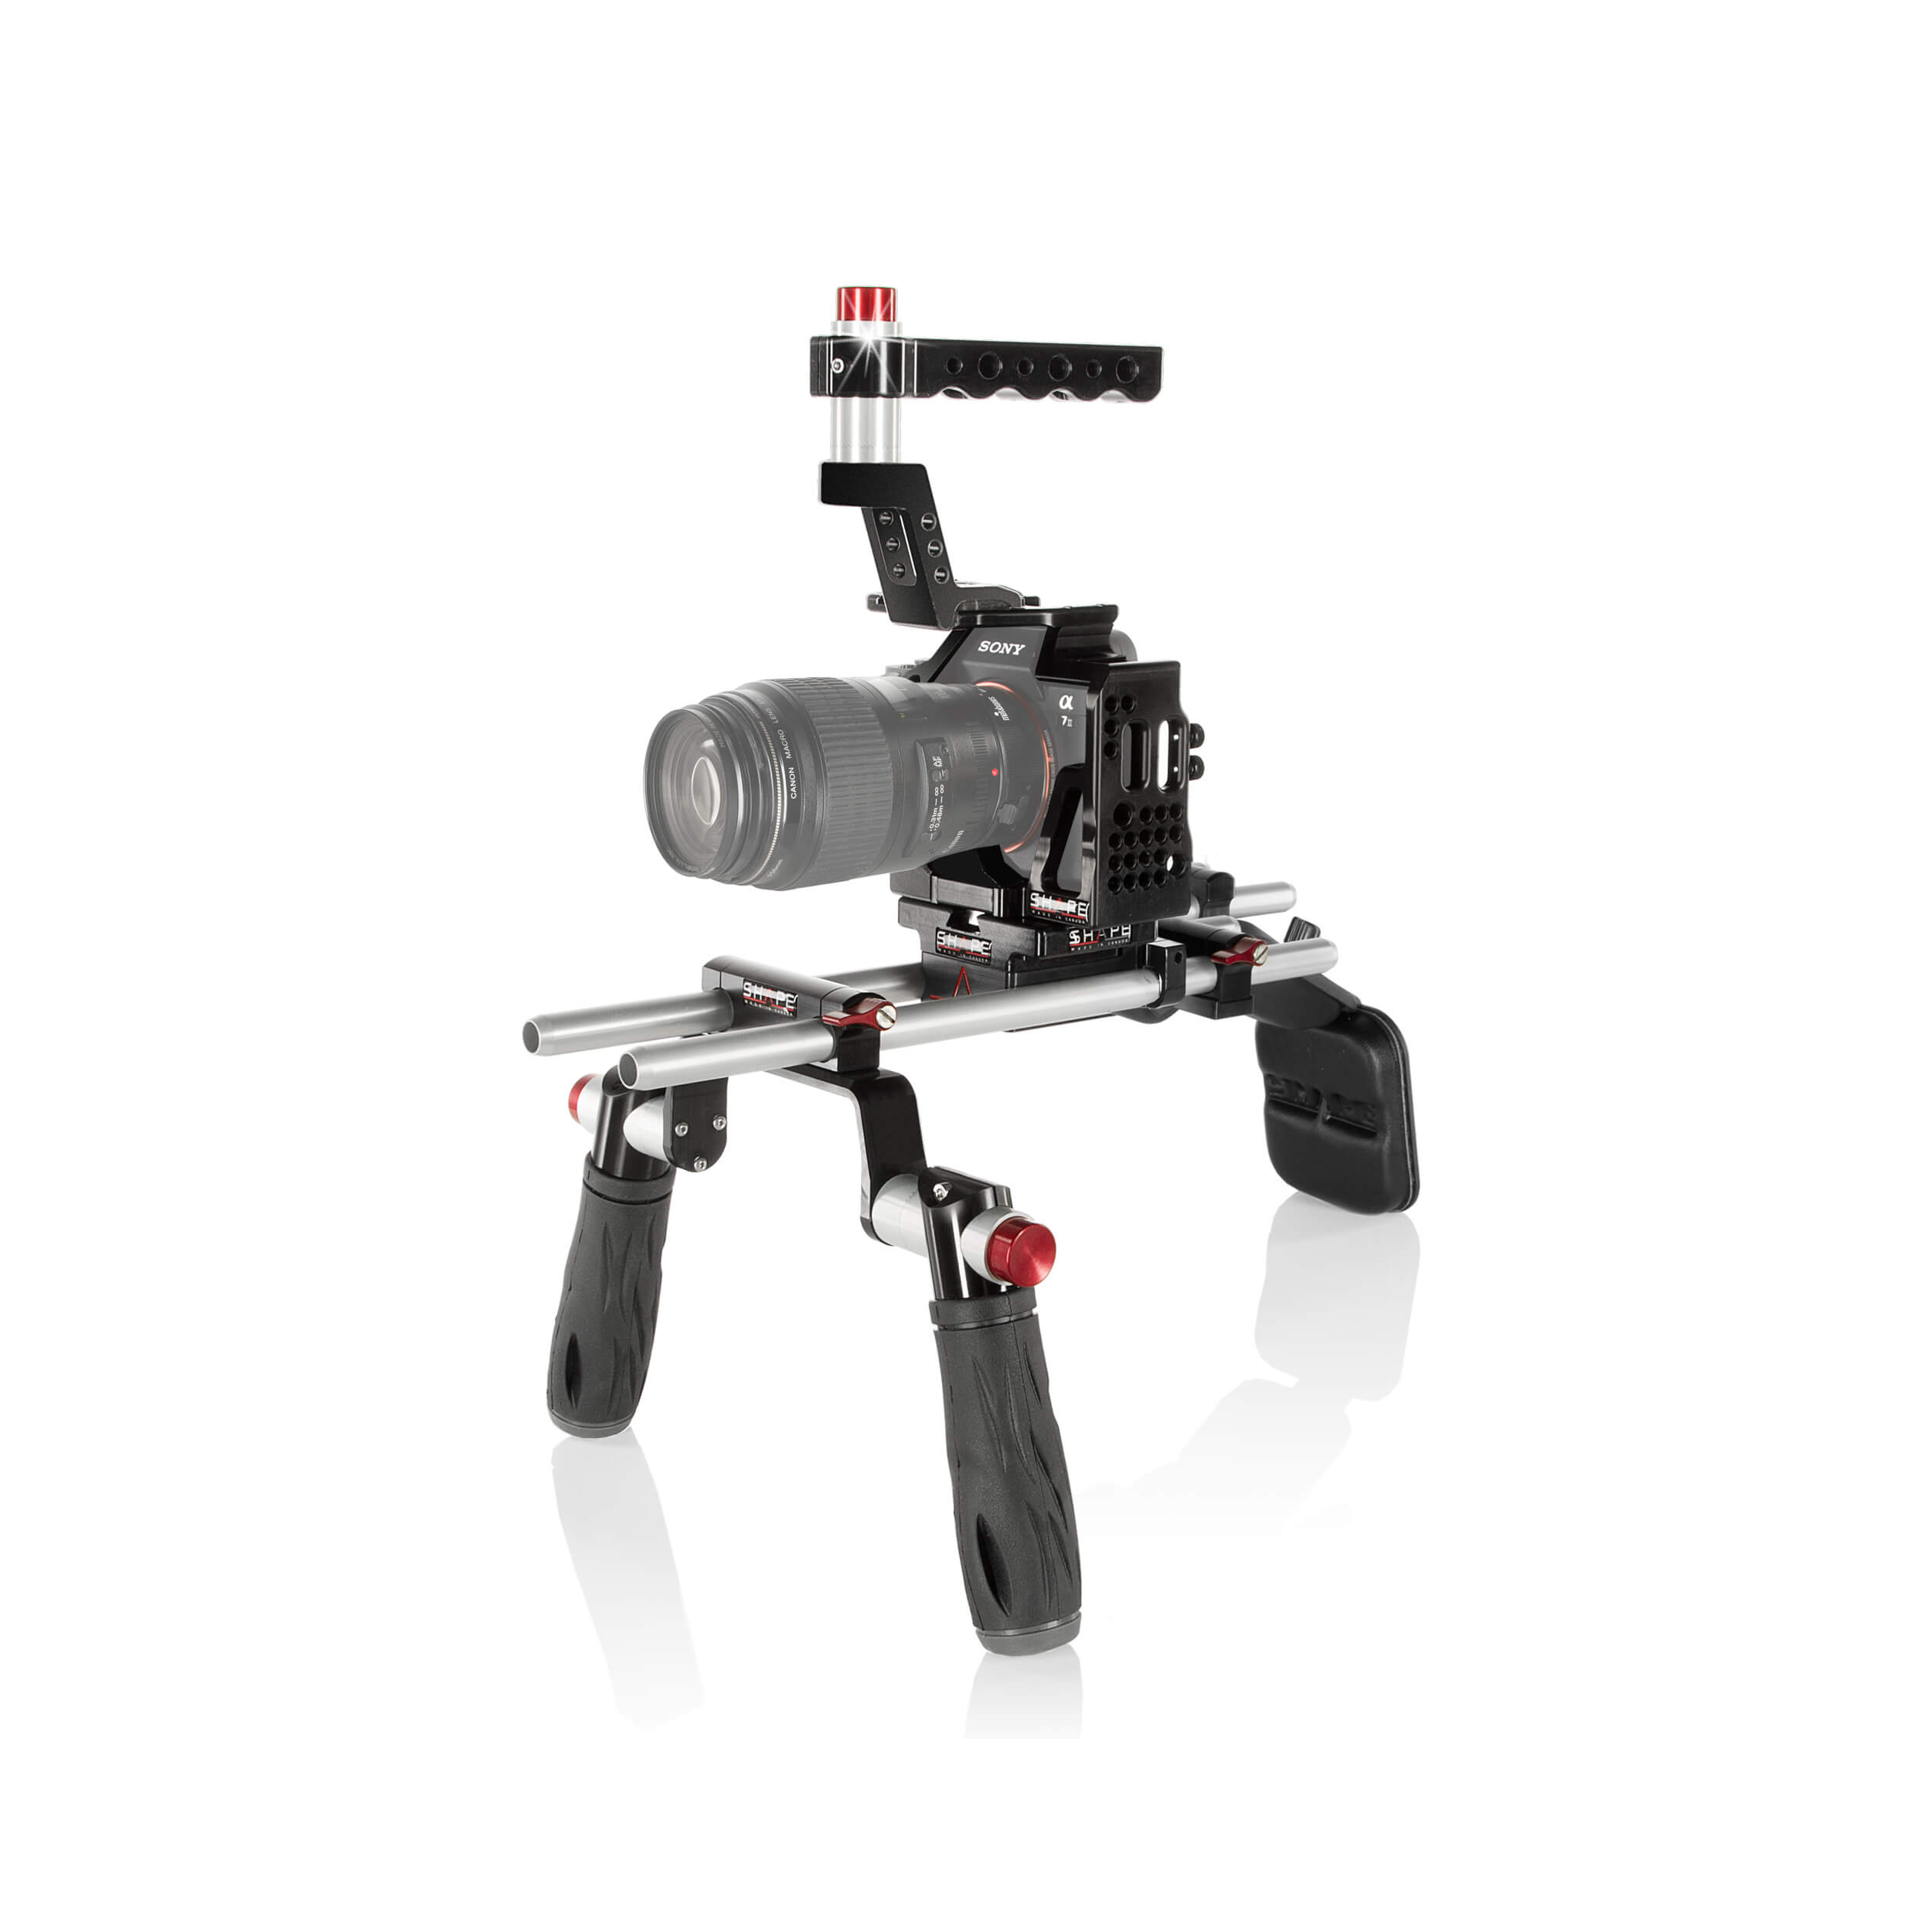 SHAPE Cage with Offset Shoulder Mount System for Sony a7 II, a7S II, & a7R II